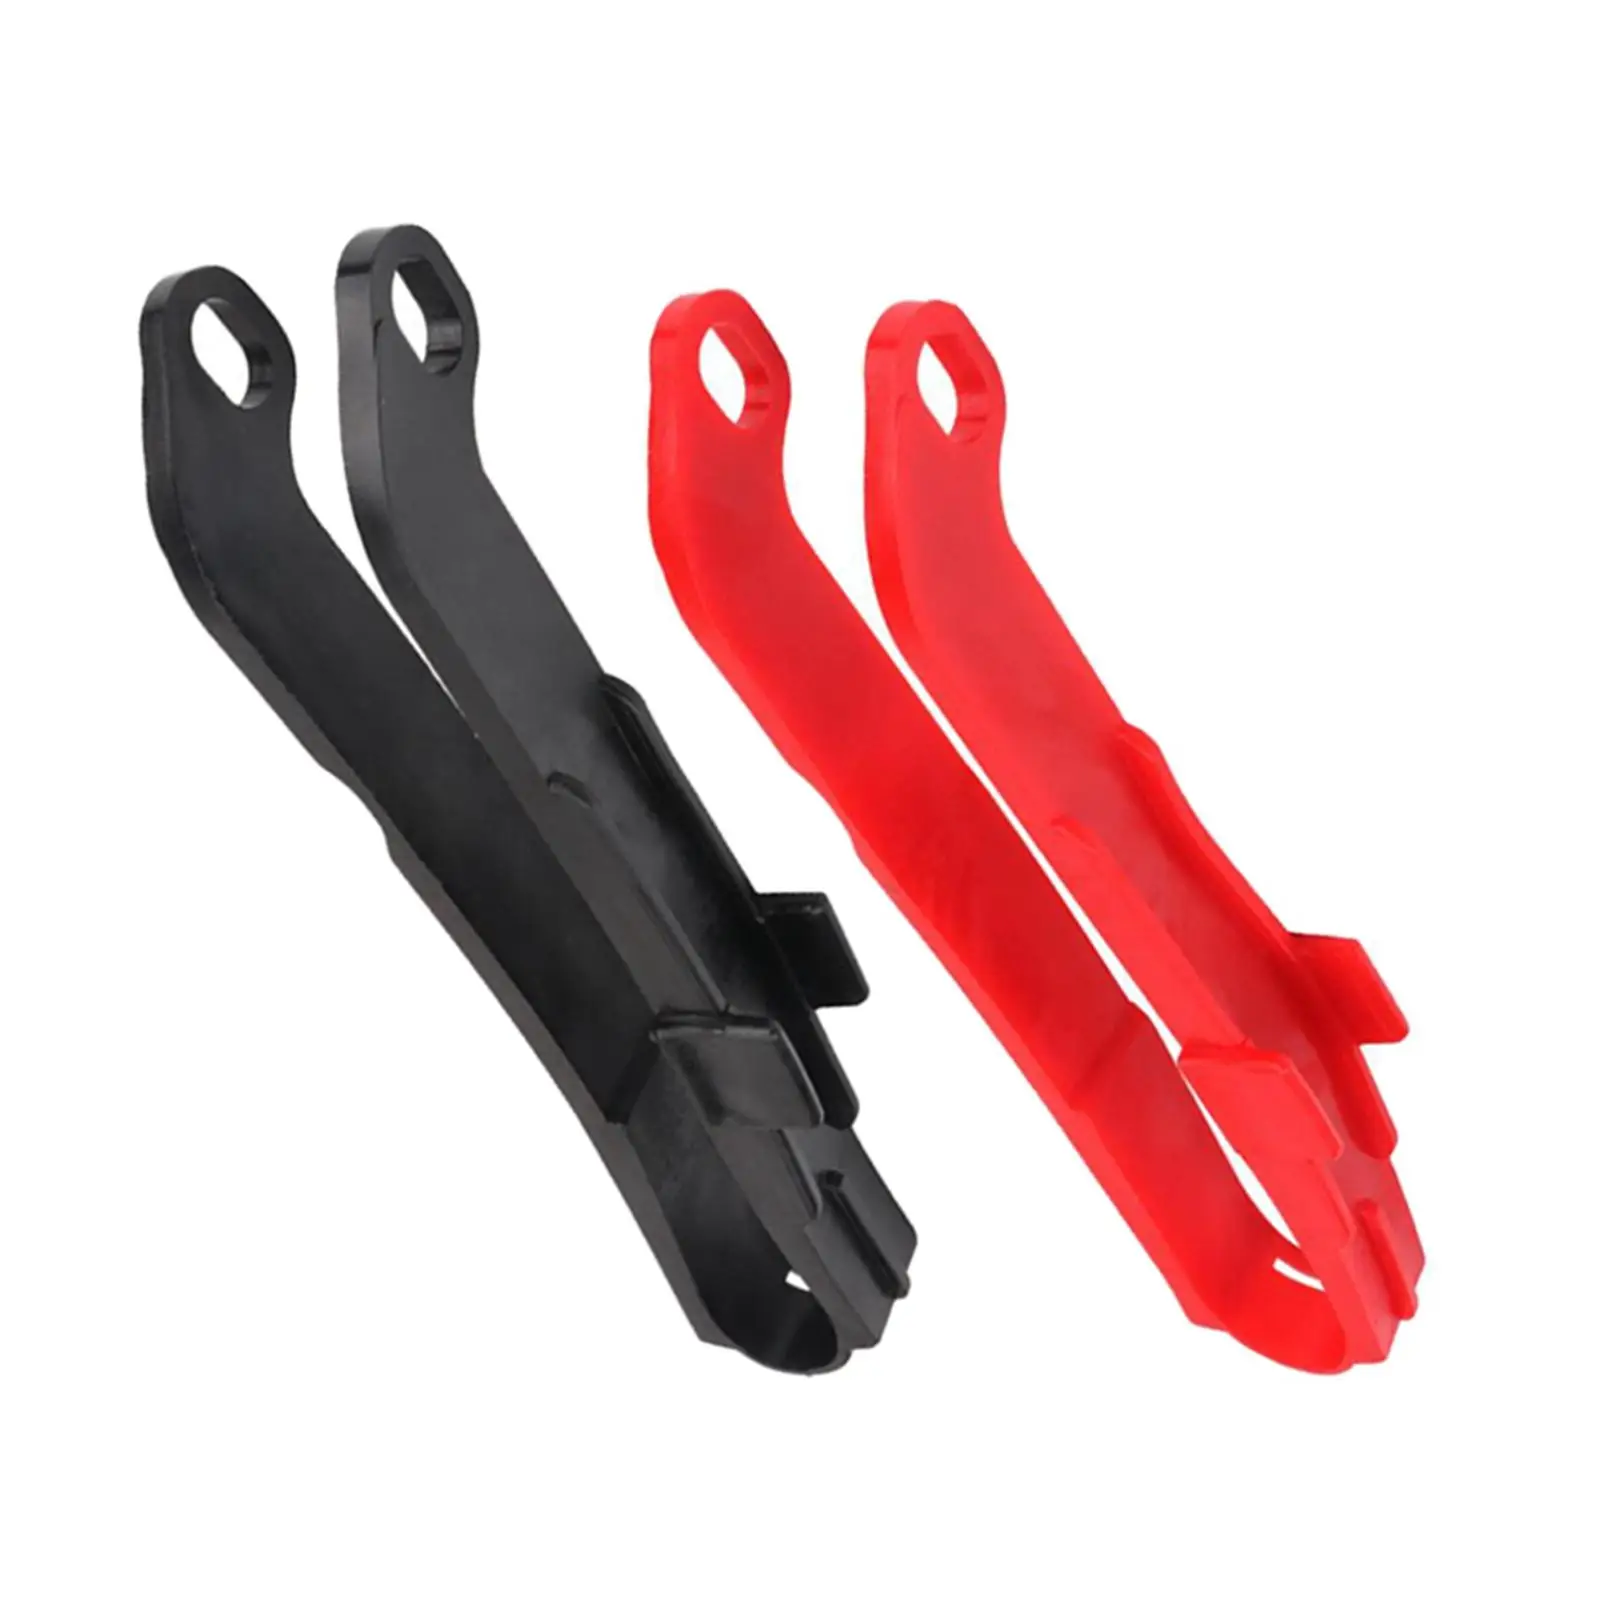 Motorcycle Chain Slider Guard Guides Chain Protector Plastic Swingarm Guard Fit for Honda XR250R XR400R XR600R XR650L Off Road